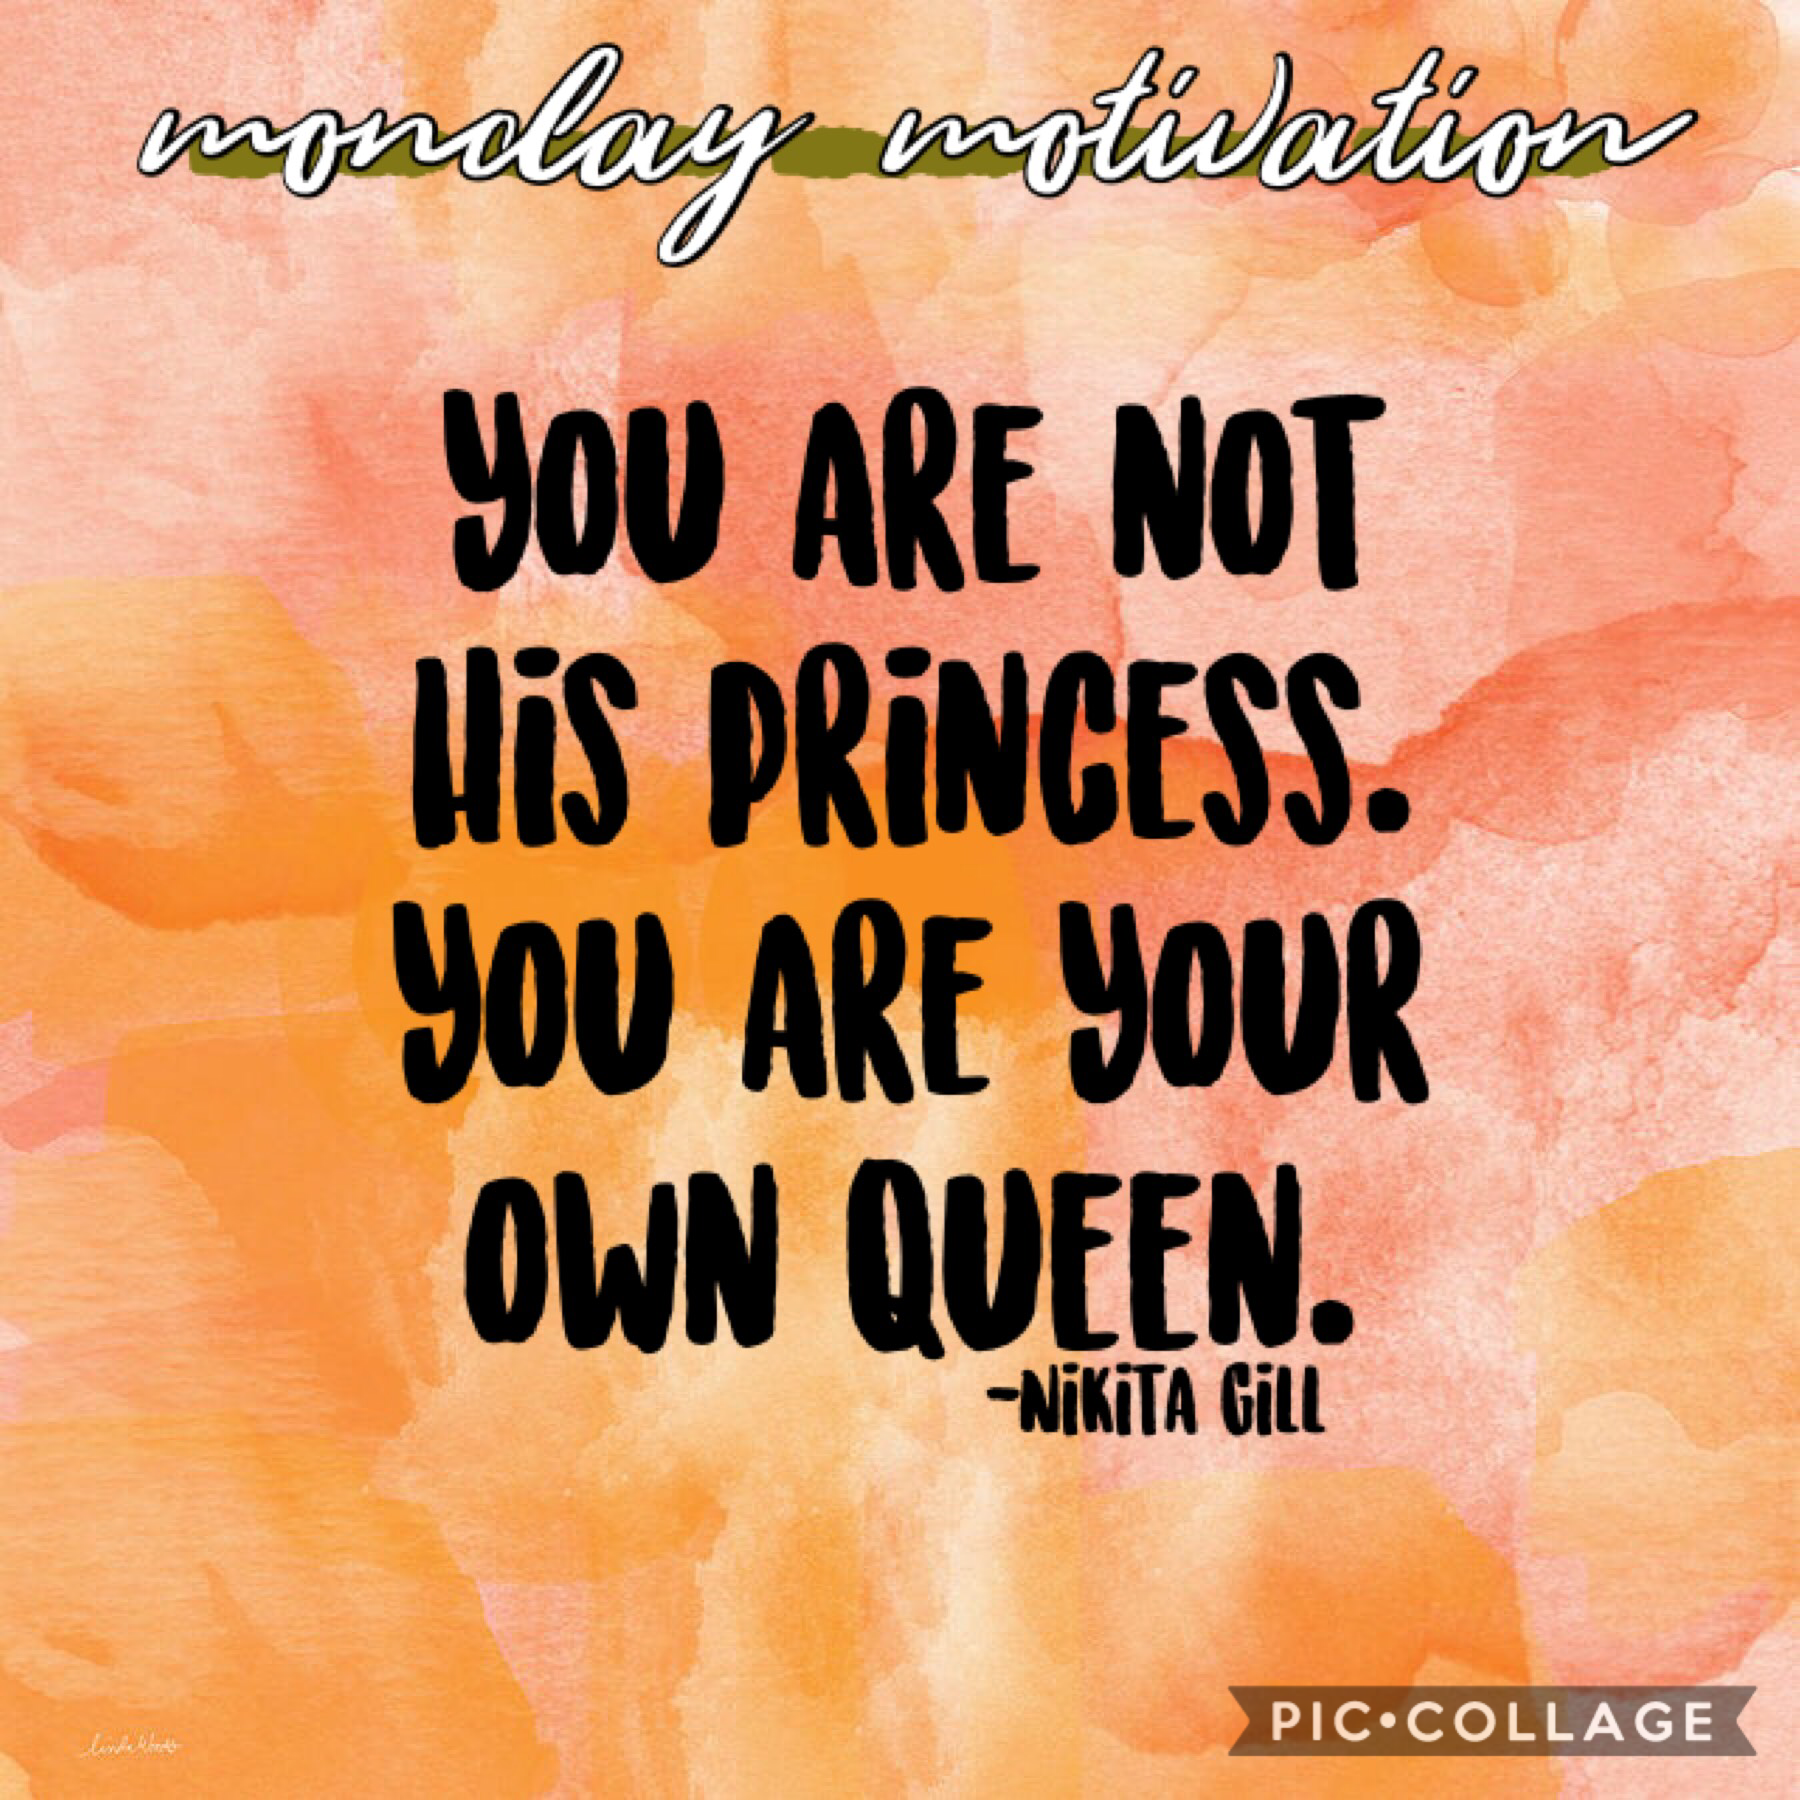 monday motivation!! (even though it’s not monday where I am yet but I always end up posting this late in the day cause I’m so busy😅) anyways be your independent self!! you do not need anyone else to validate you🧡🧡
stay strong everyone